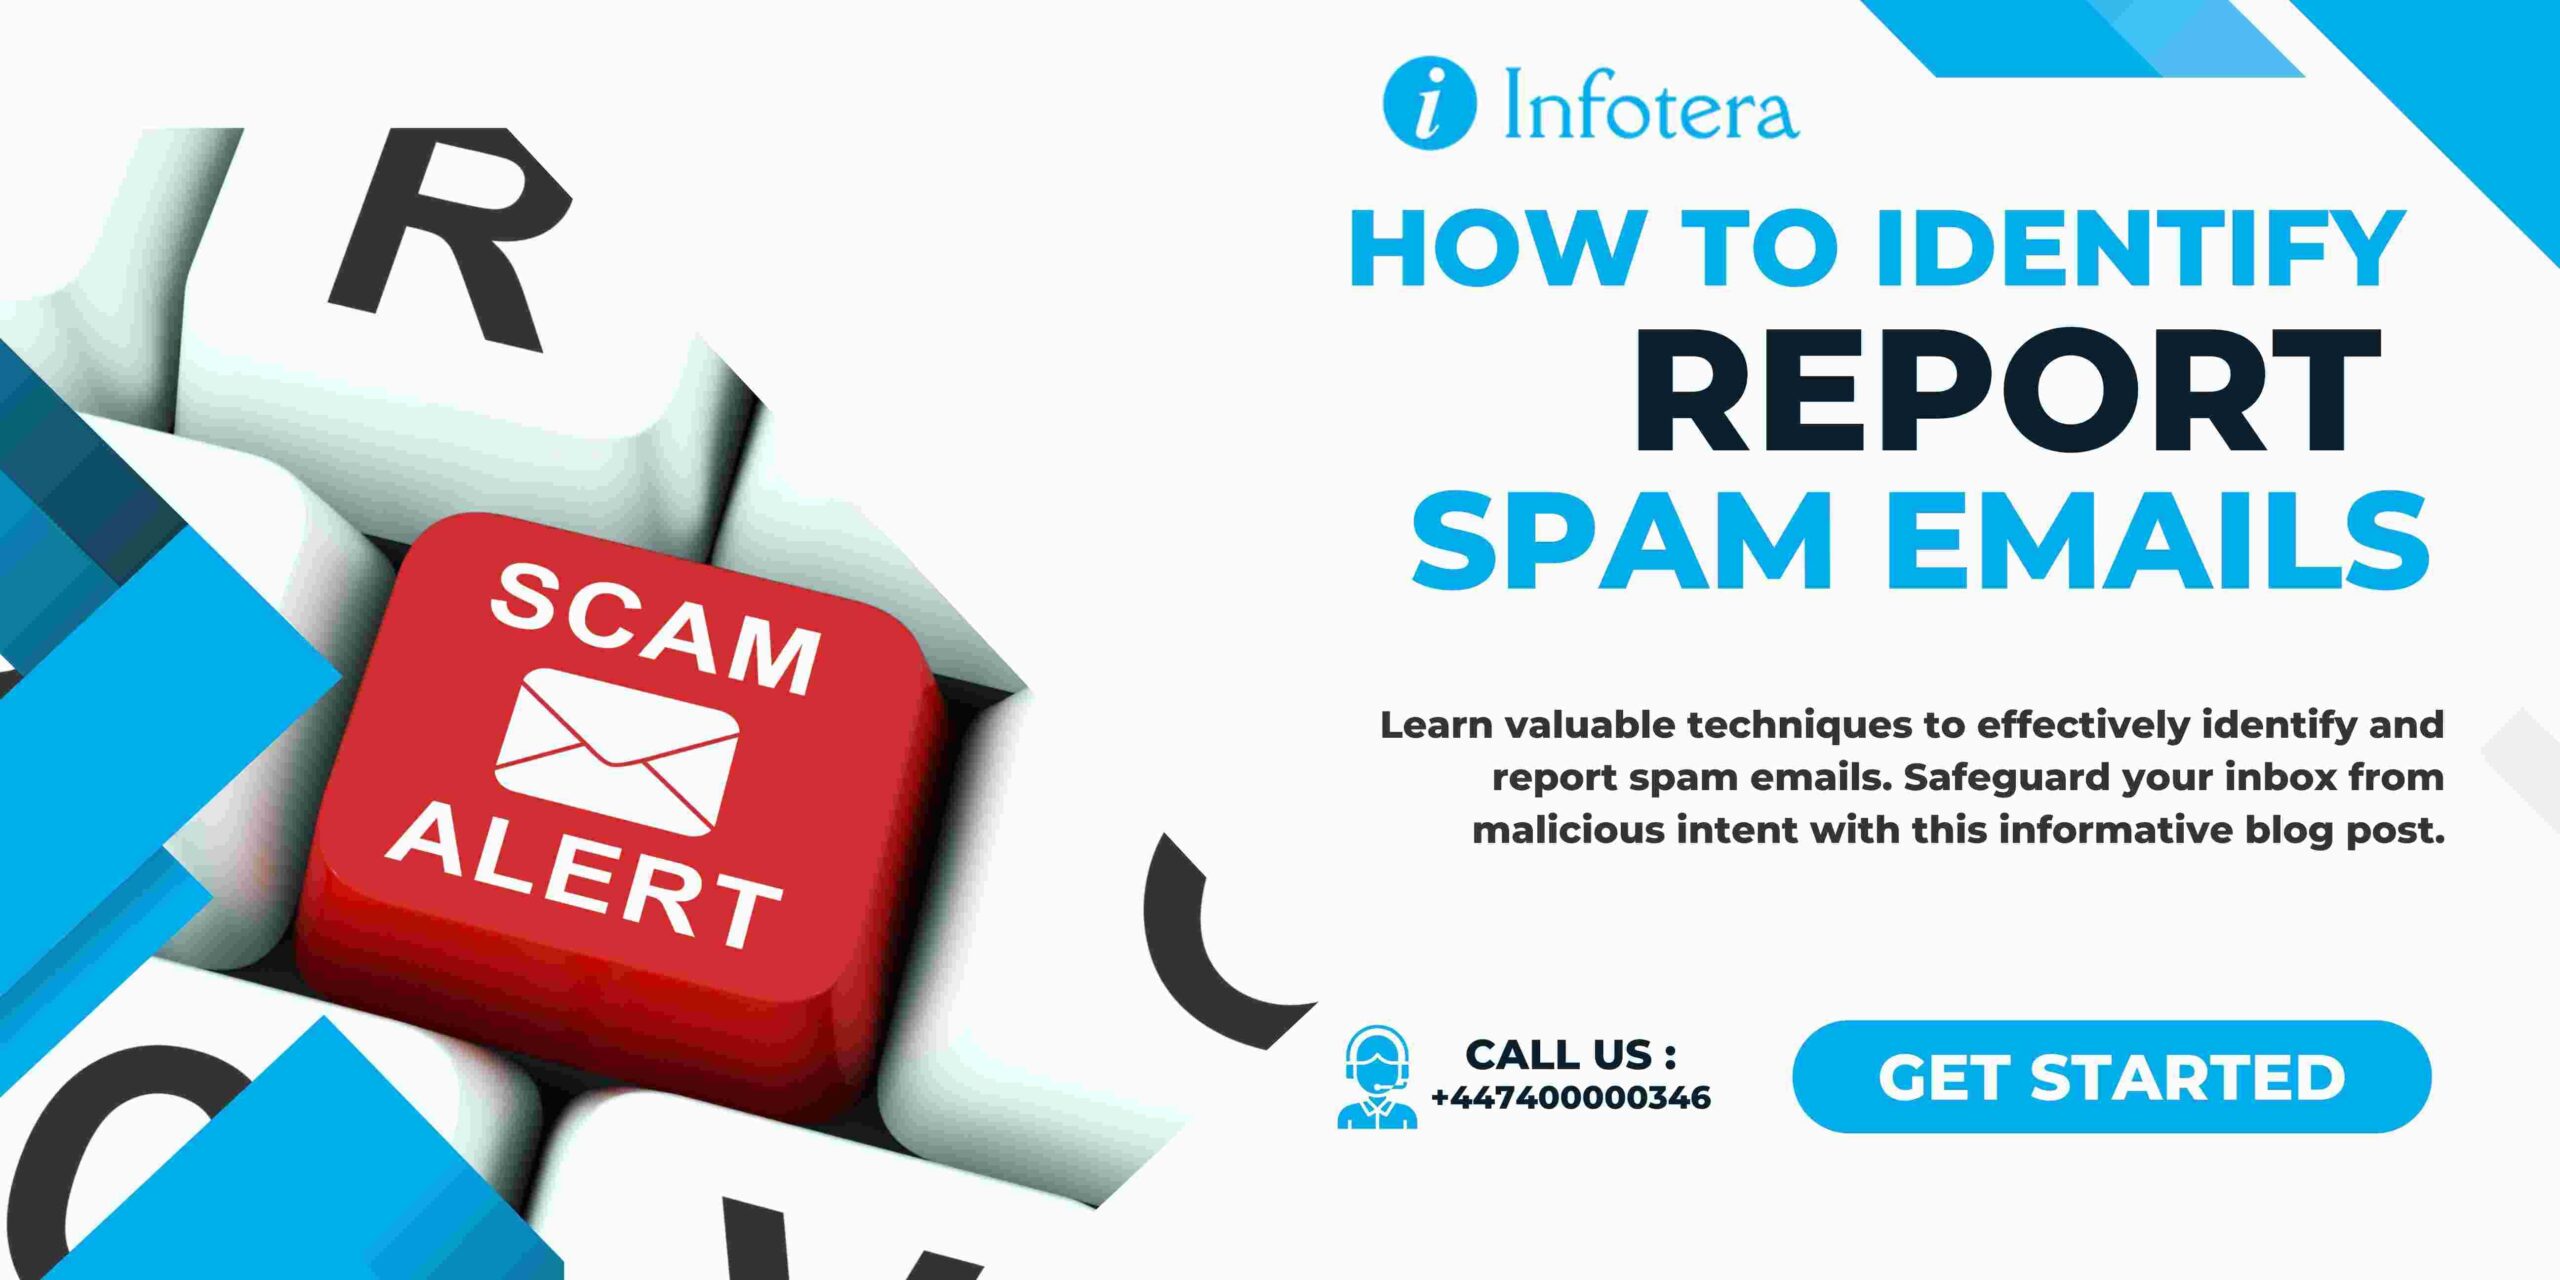 How To Identify And Report Spam Emails